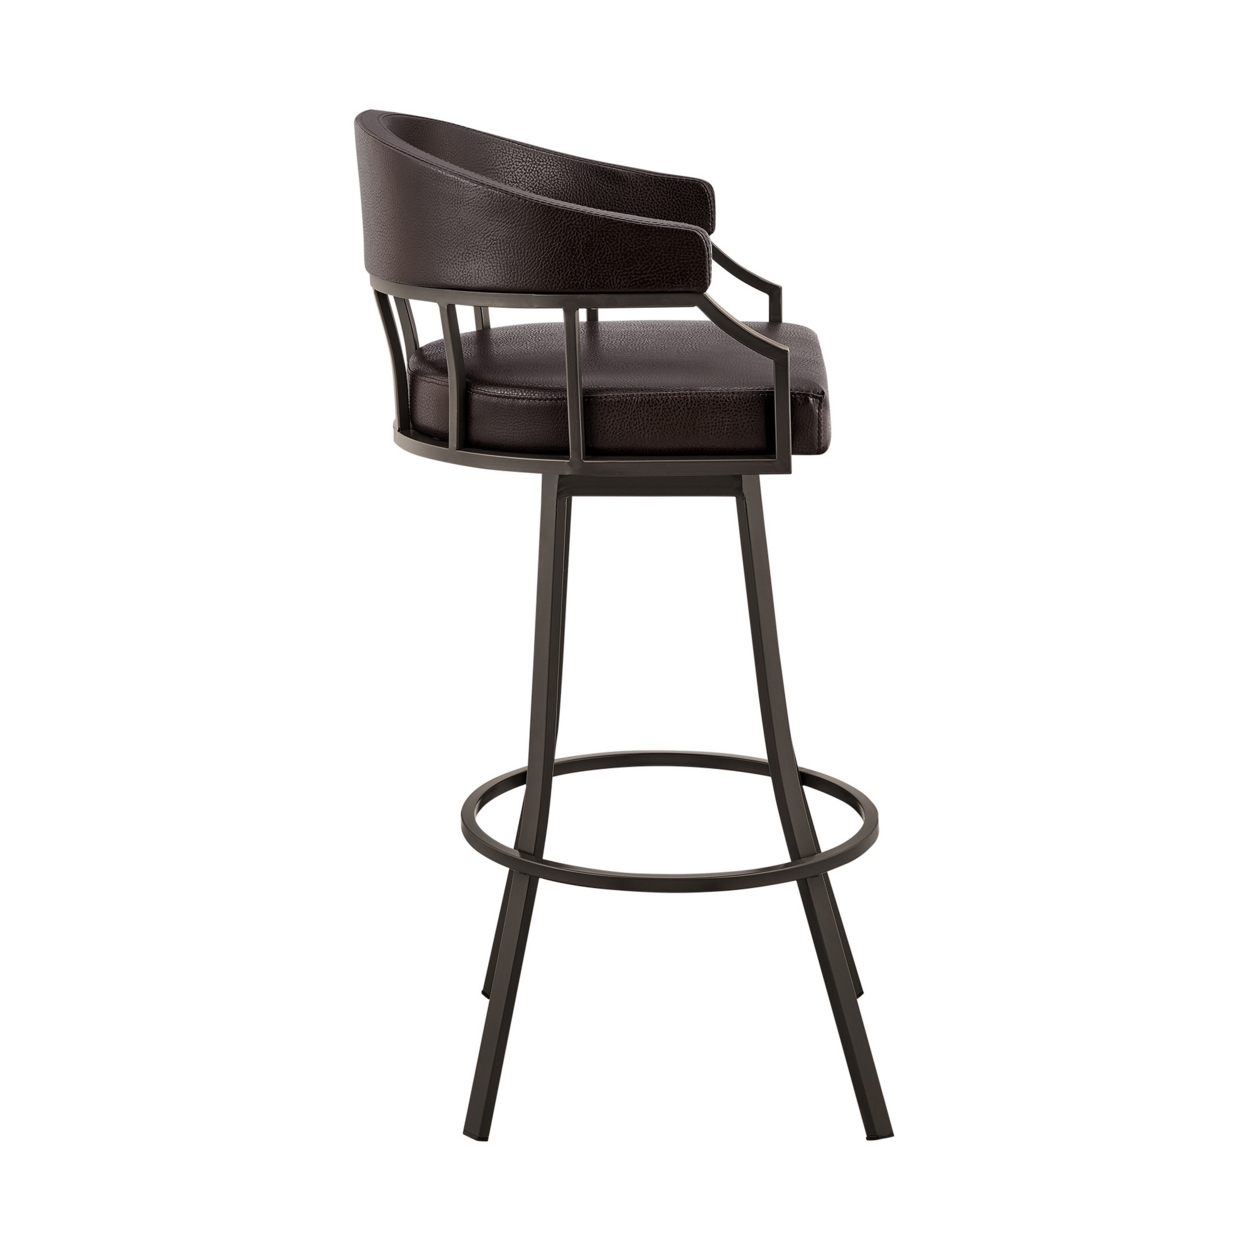 Cade 26 Inch Counter Stool, Cushioned, Swivel Chair, Faux Leather, Brown- Saltoro Sherpi